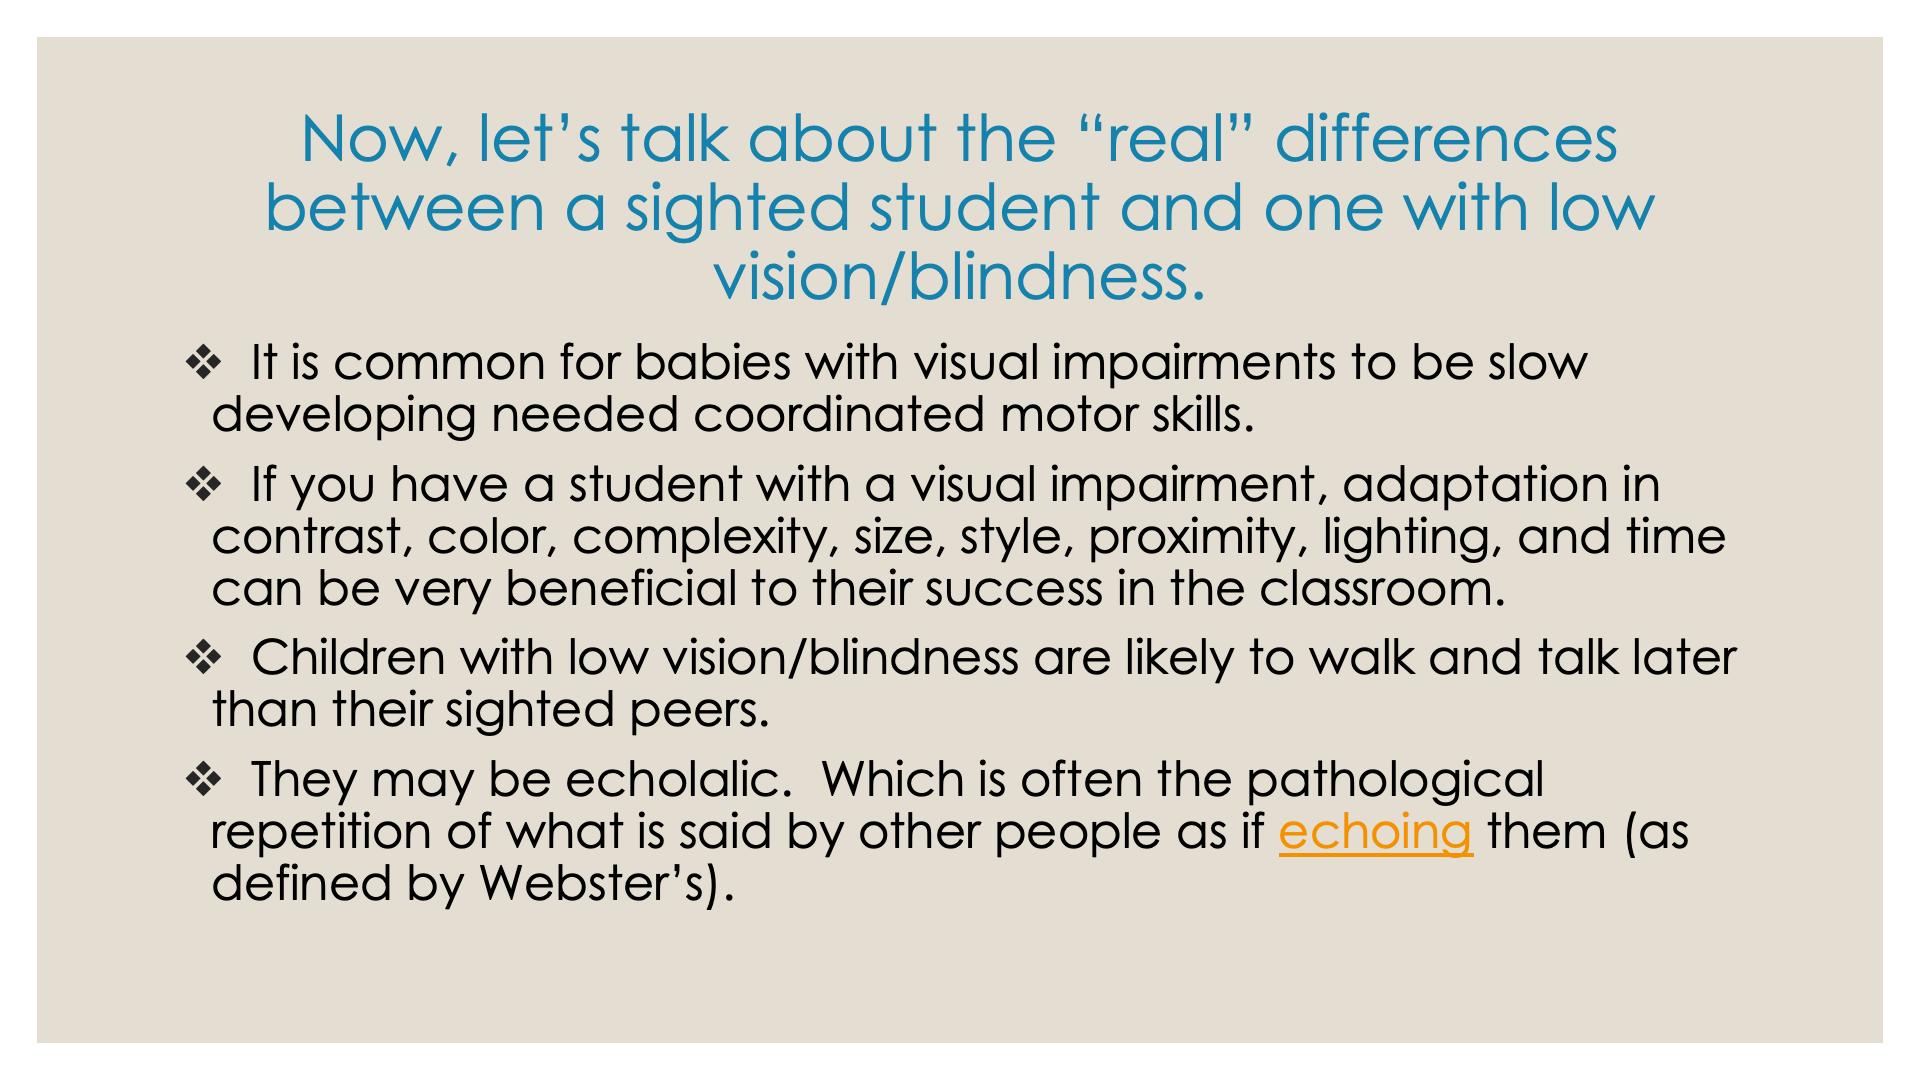 Now, let’s talk about the “real” differences between a sighted student and one with low vision/blindness.